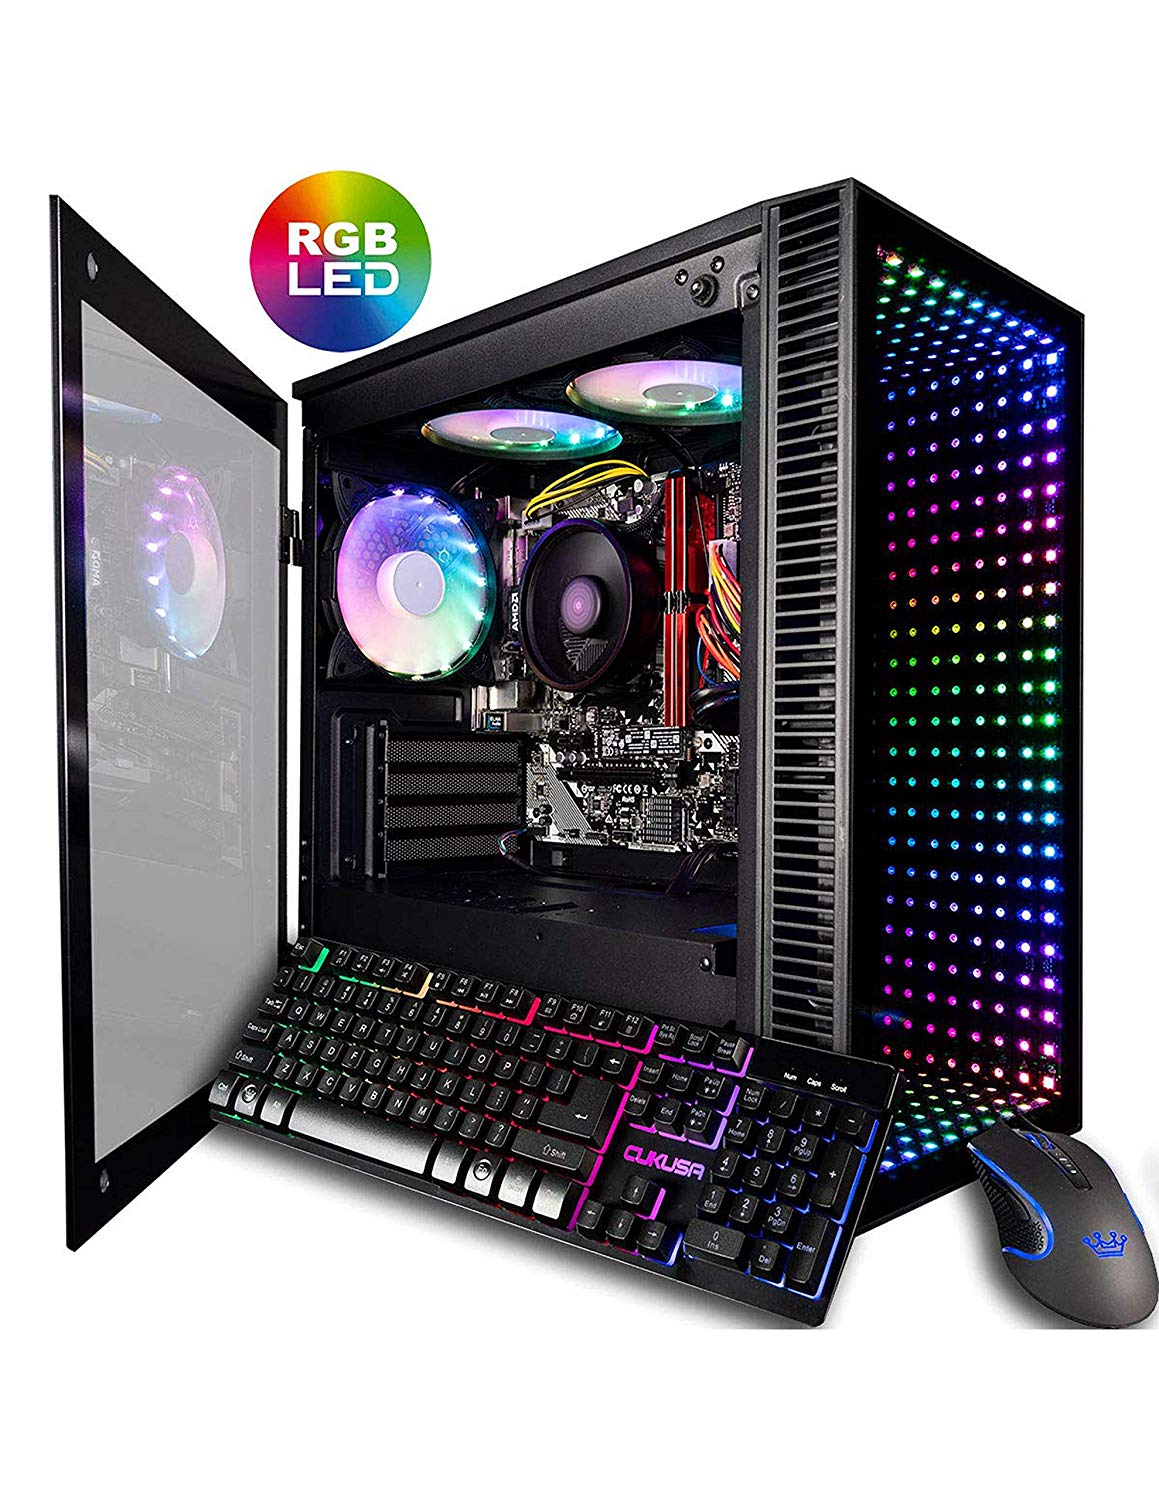 Simple Build A Gaming Pc Under 500 with RGB